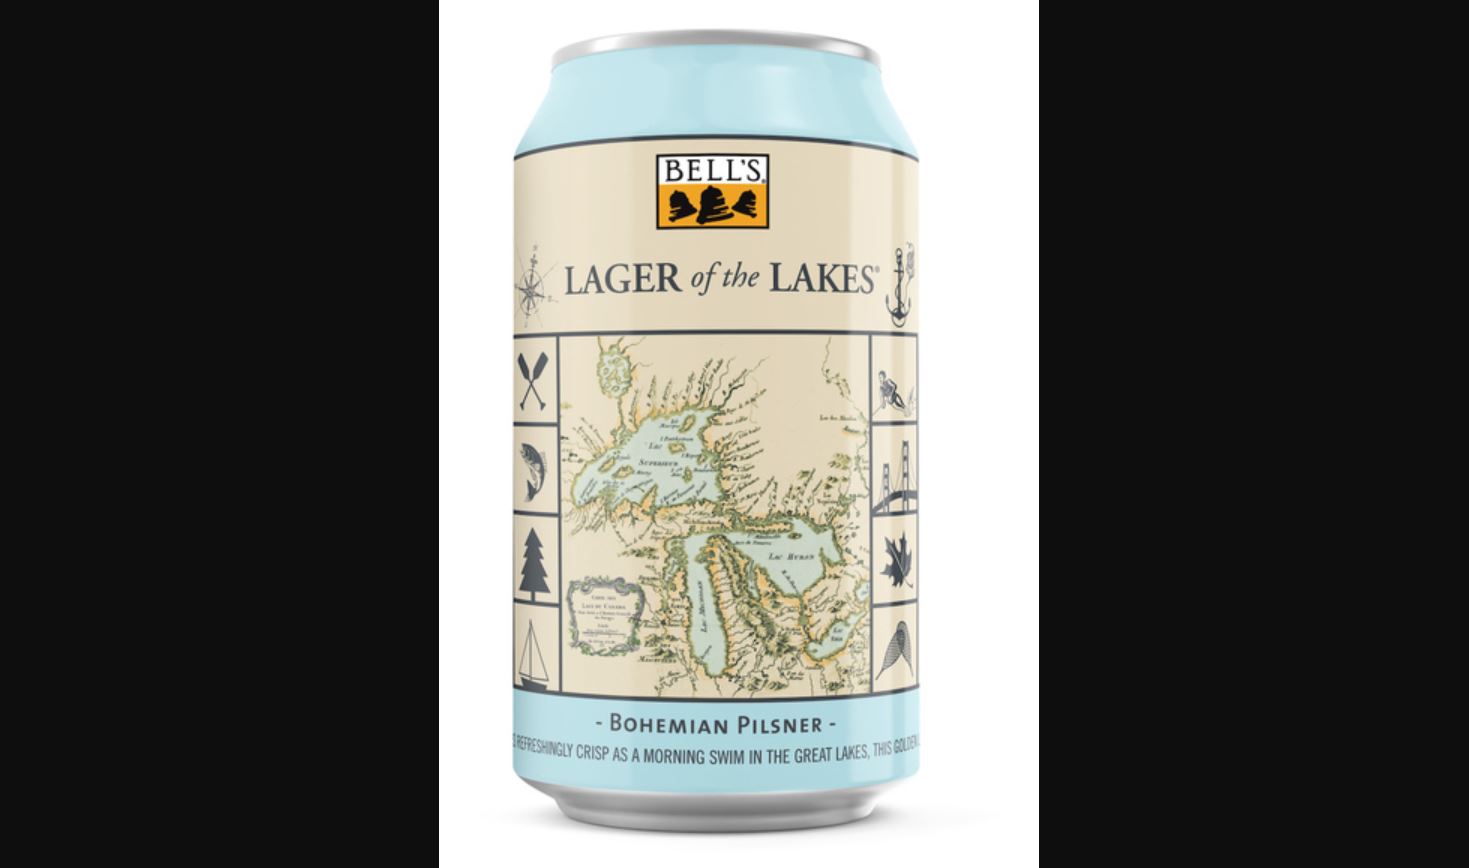 Bell’s Lager of The Lakes